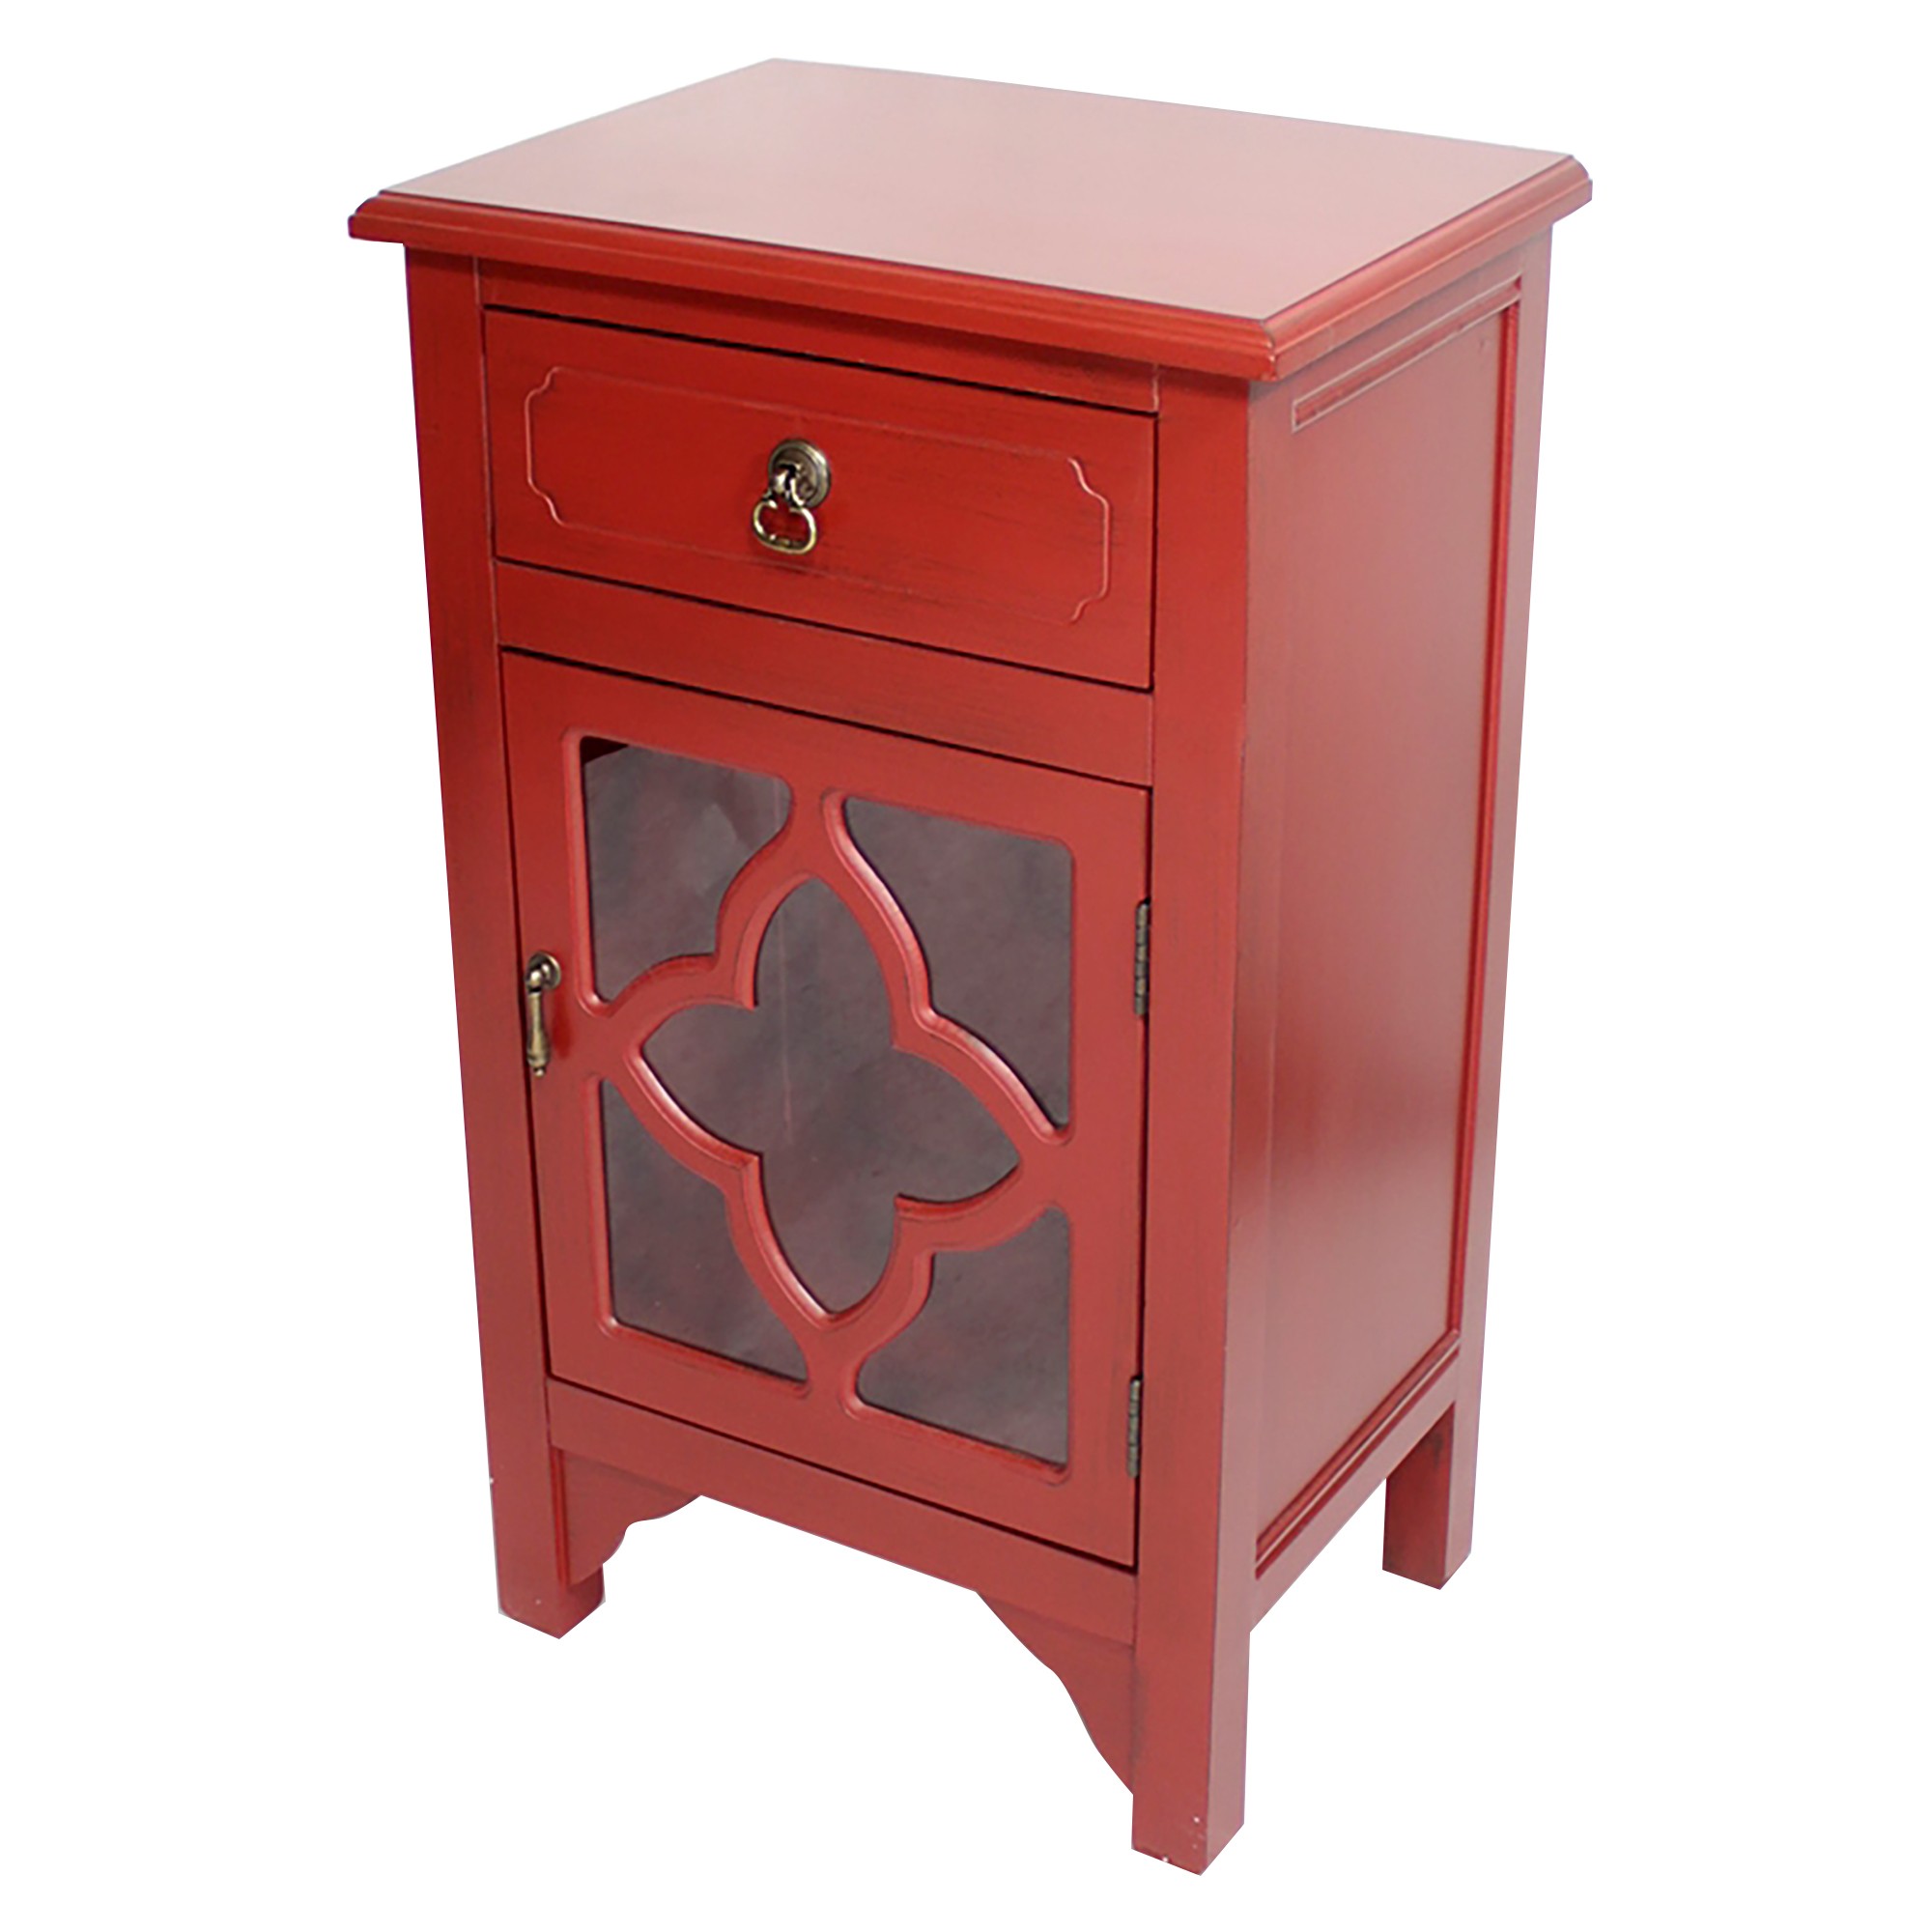 18" X 13" X 30" Red MDF Wood Clear Glass Accent Cabinet with a Drawer and Door and Quatrefoil Inserts